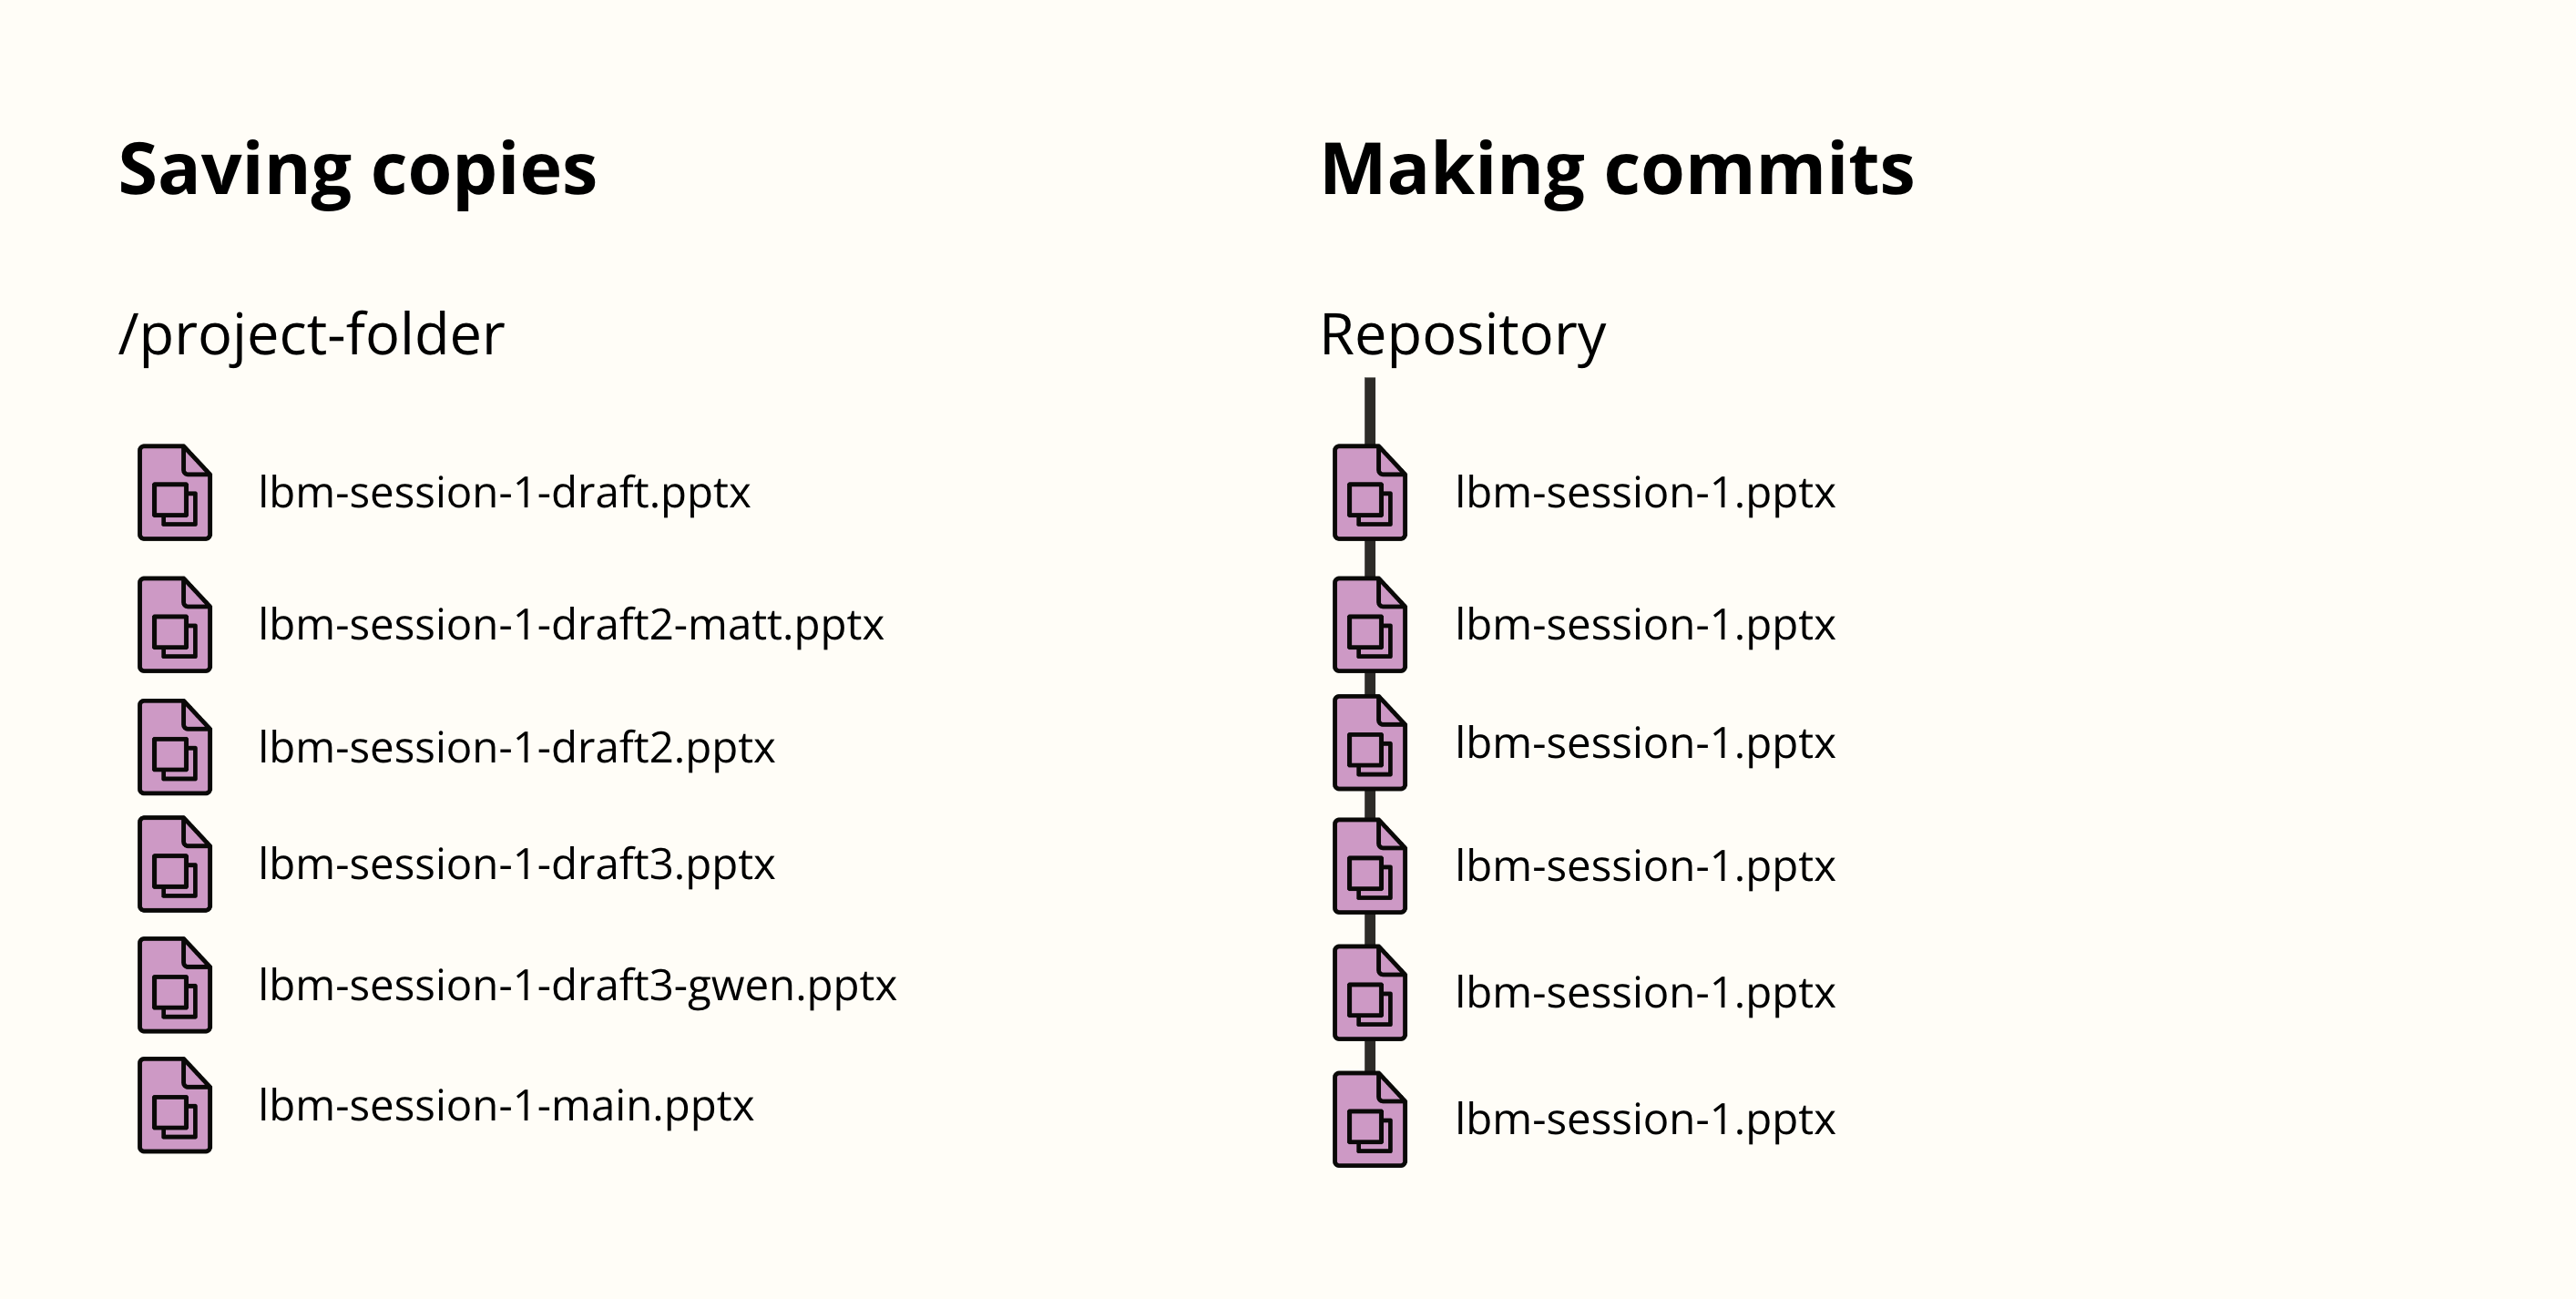 An image showing how traditionally files get copied around and given ambiguous names. Whereas in git the same file keeps the same name and "commits" are stacked one after the other.